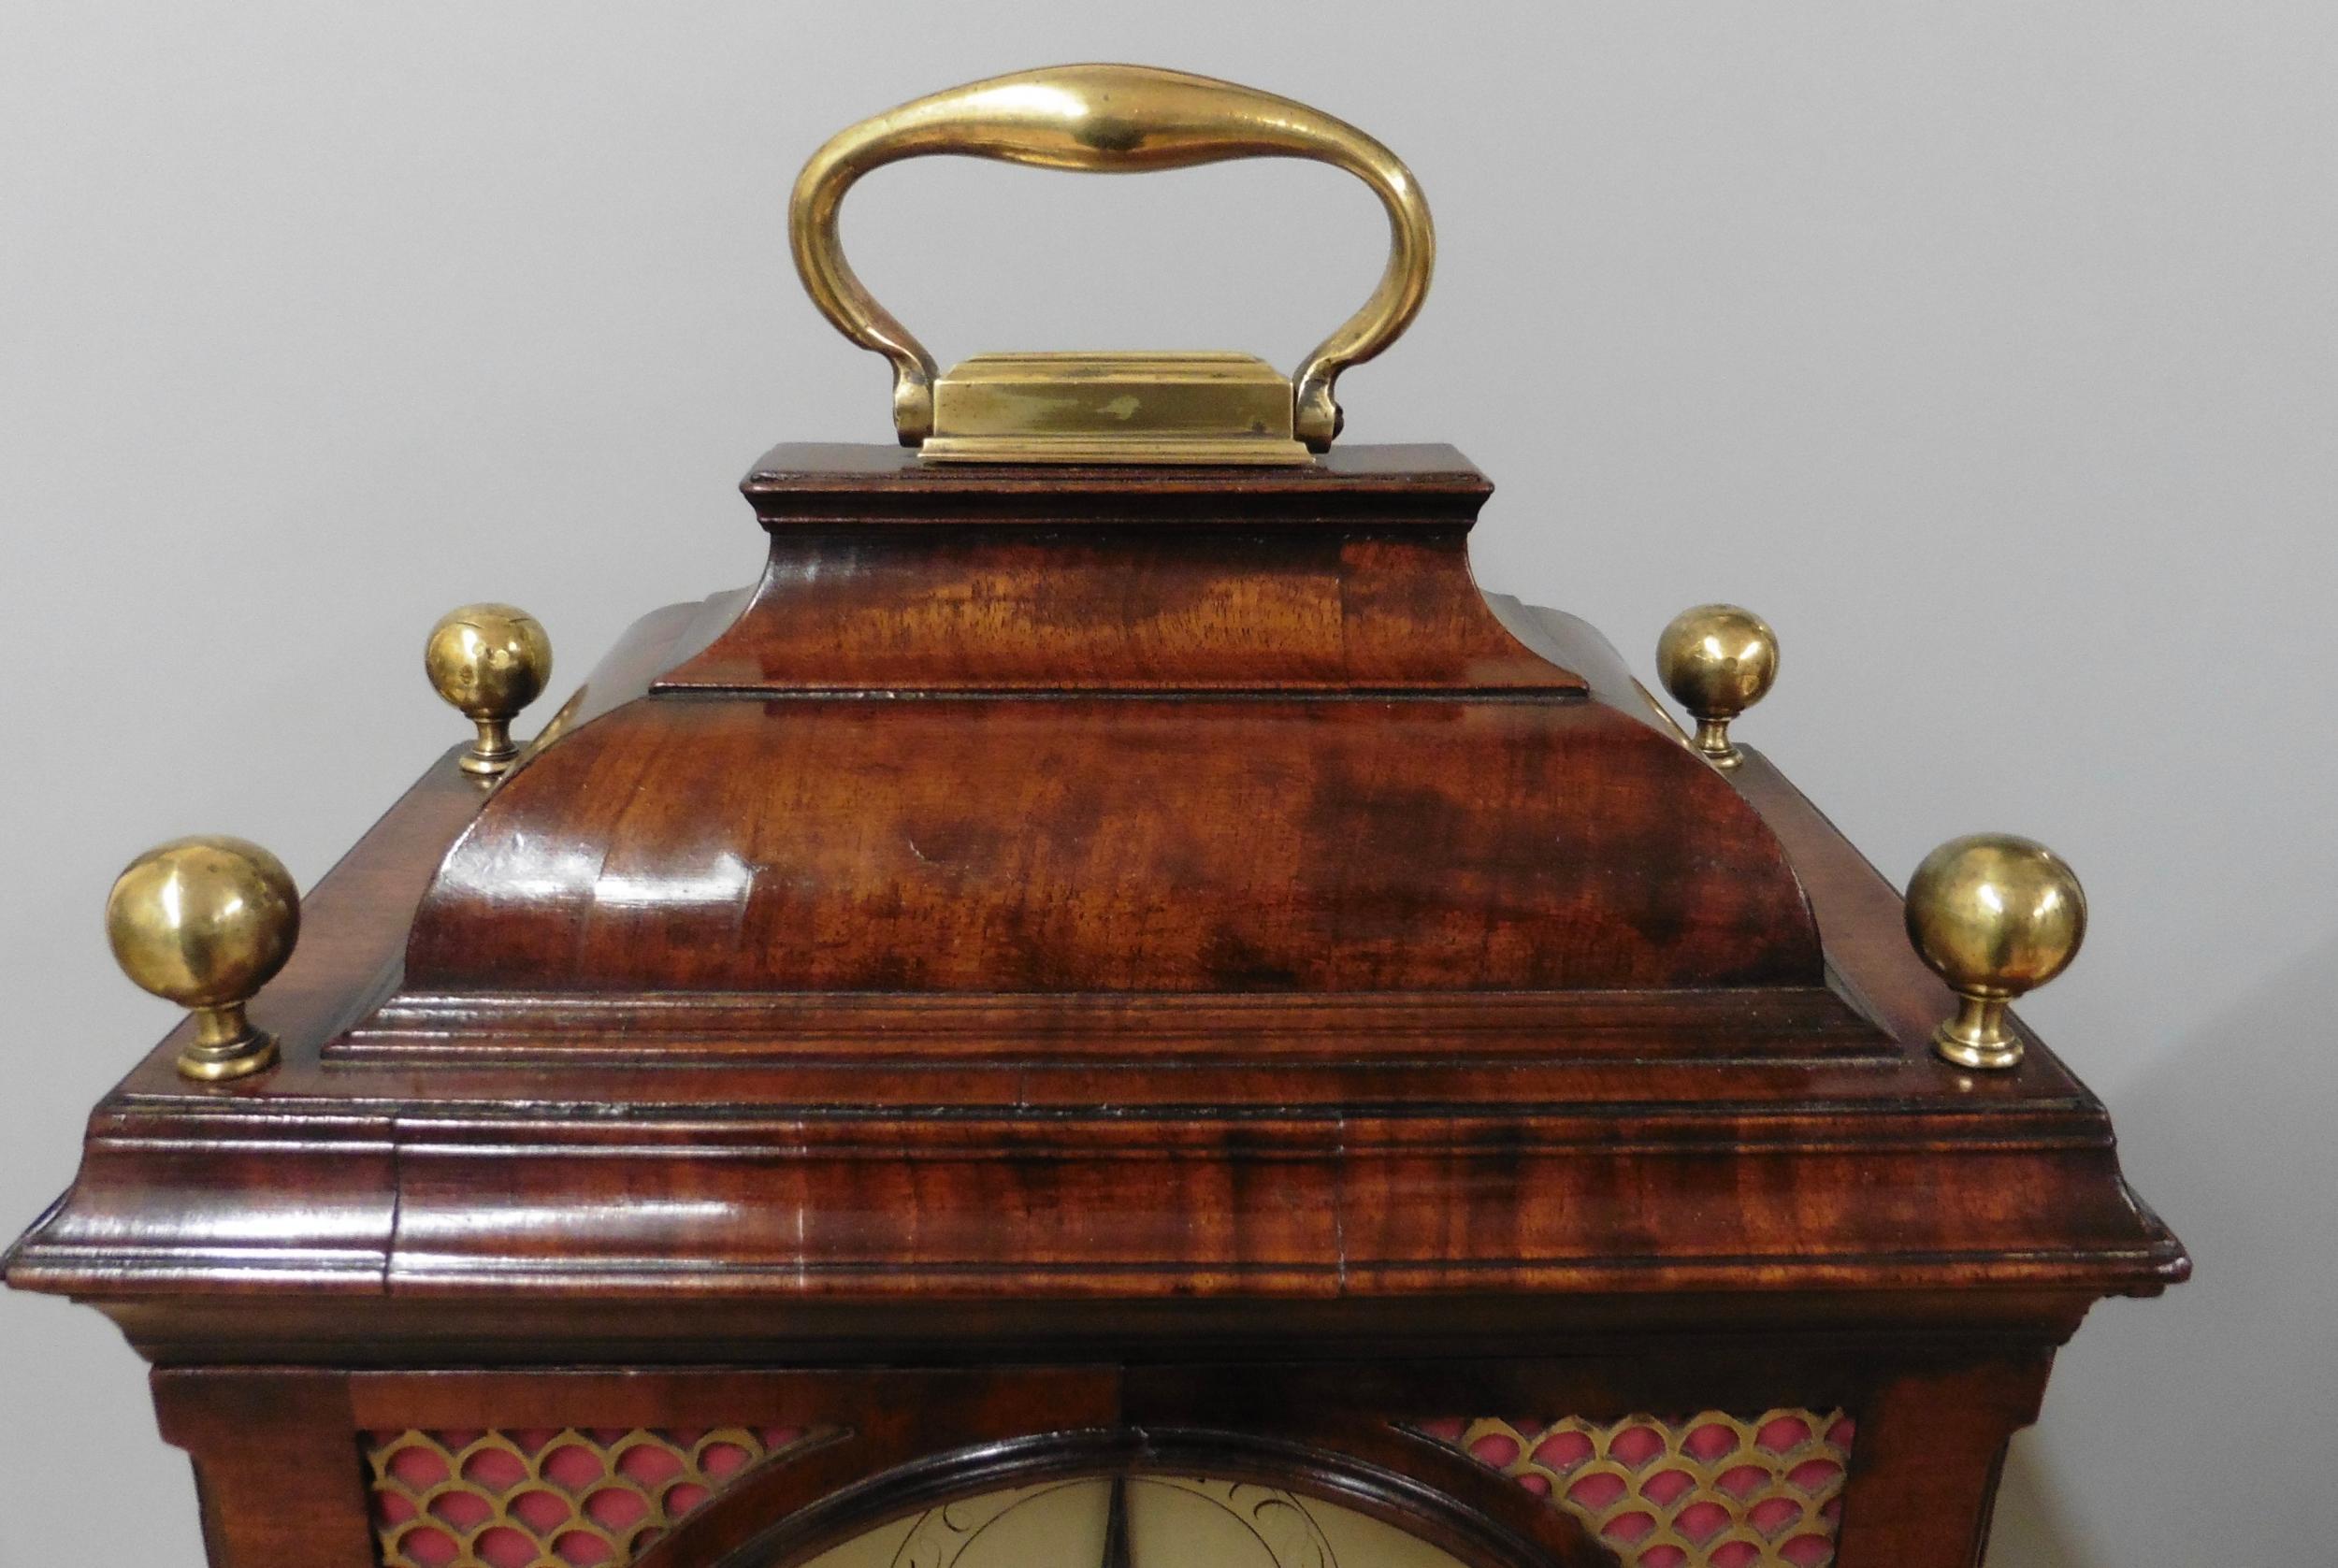 George III Mahogany Bell Top Bracket Clock With Verge Escapement by H.Thomas For Sale 5